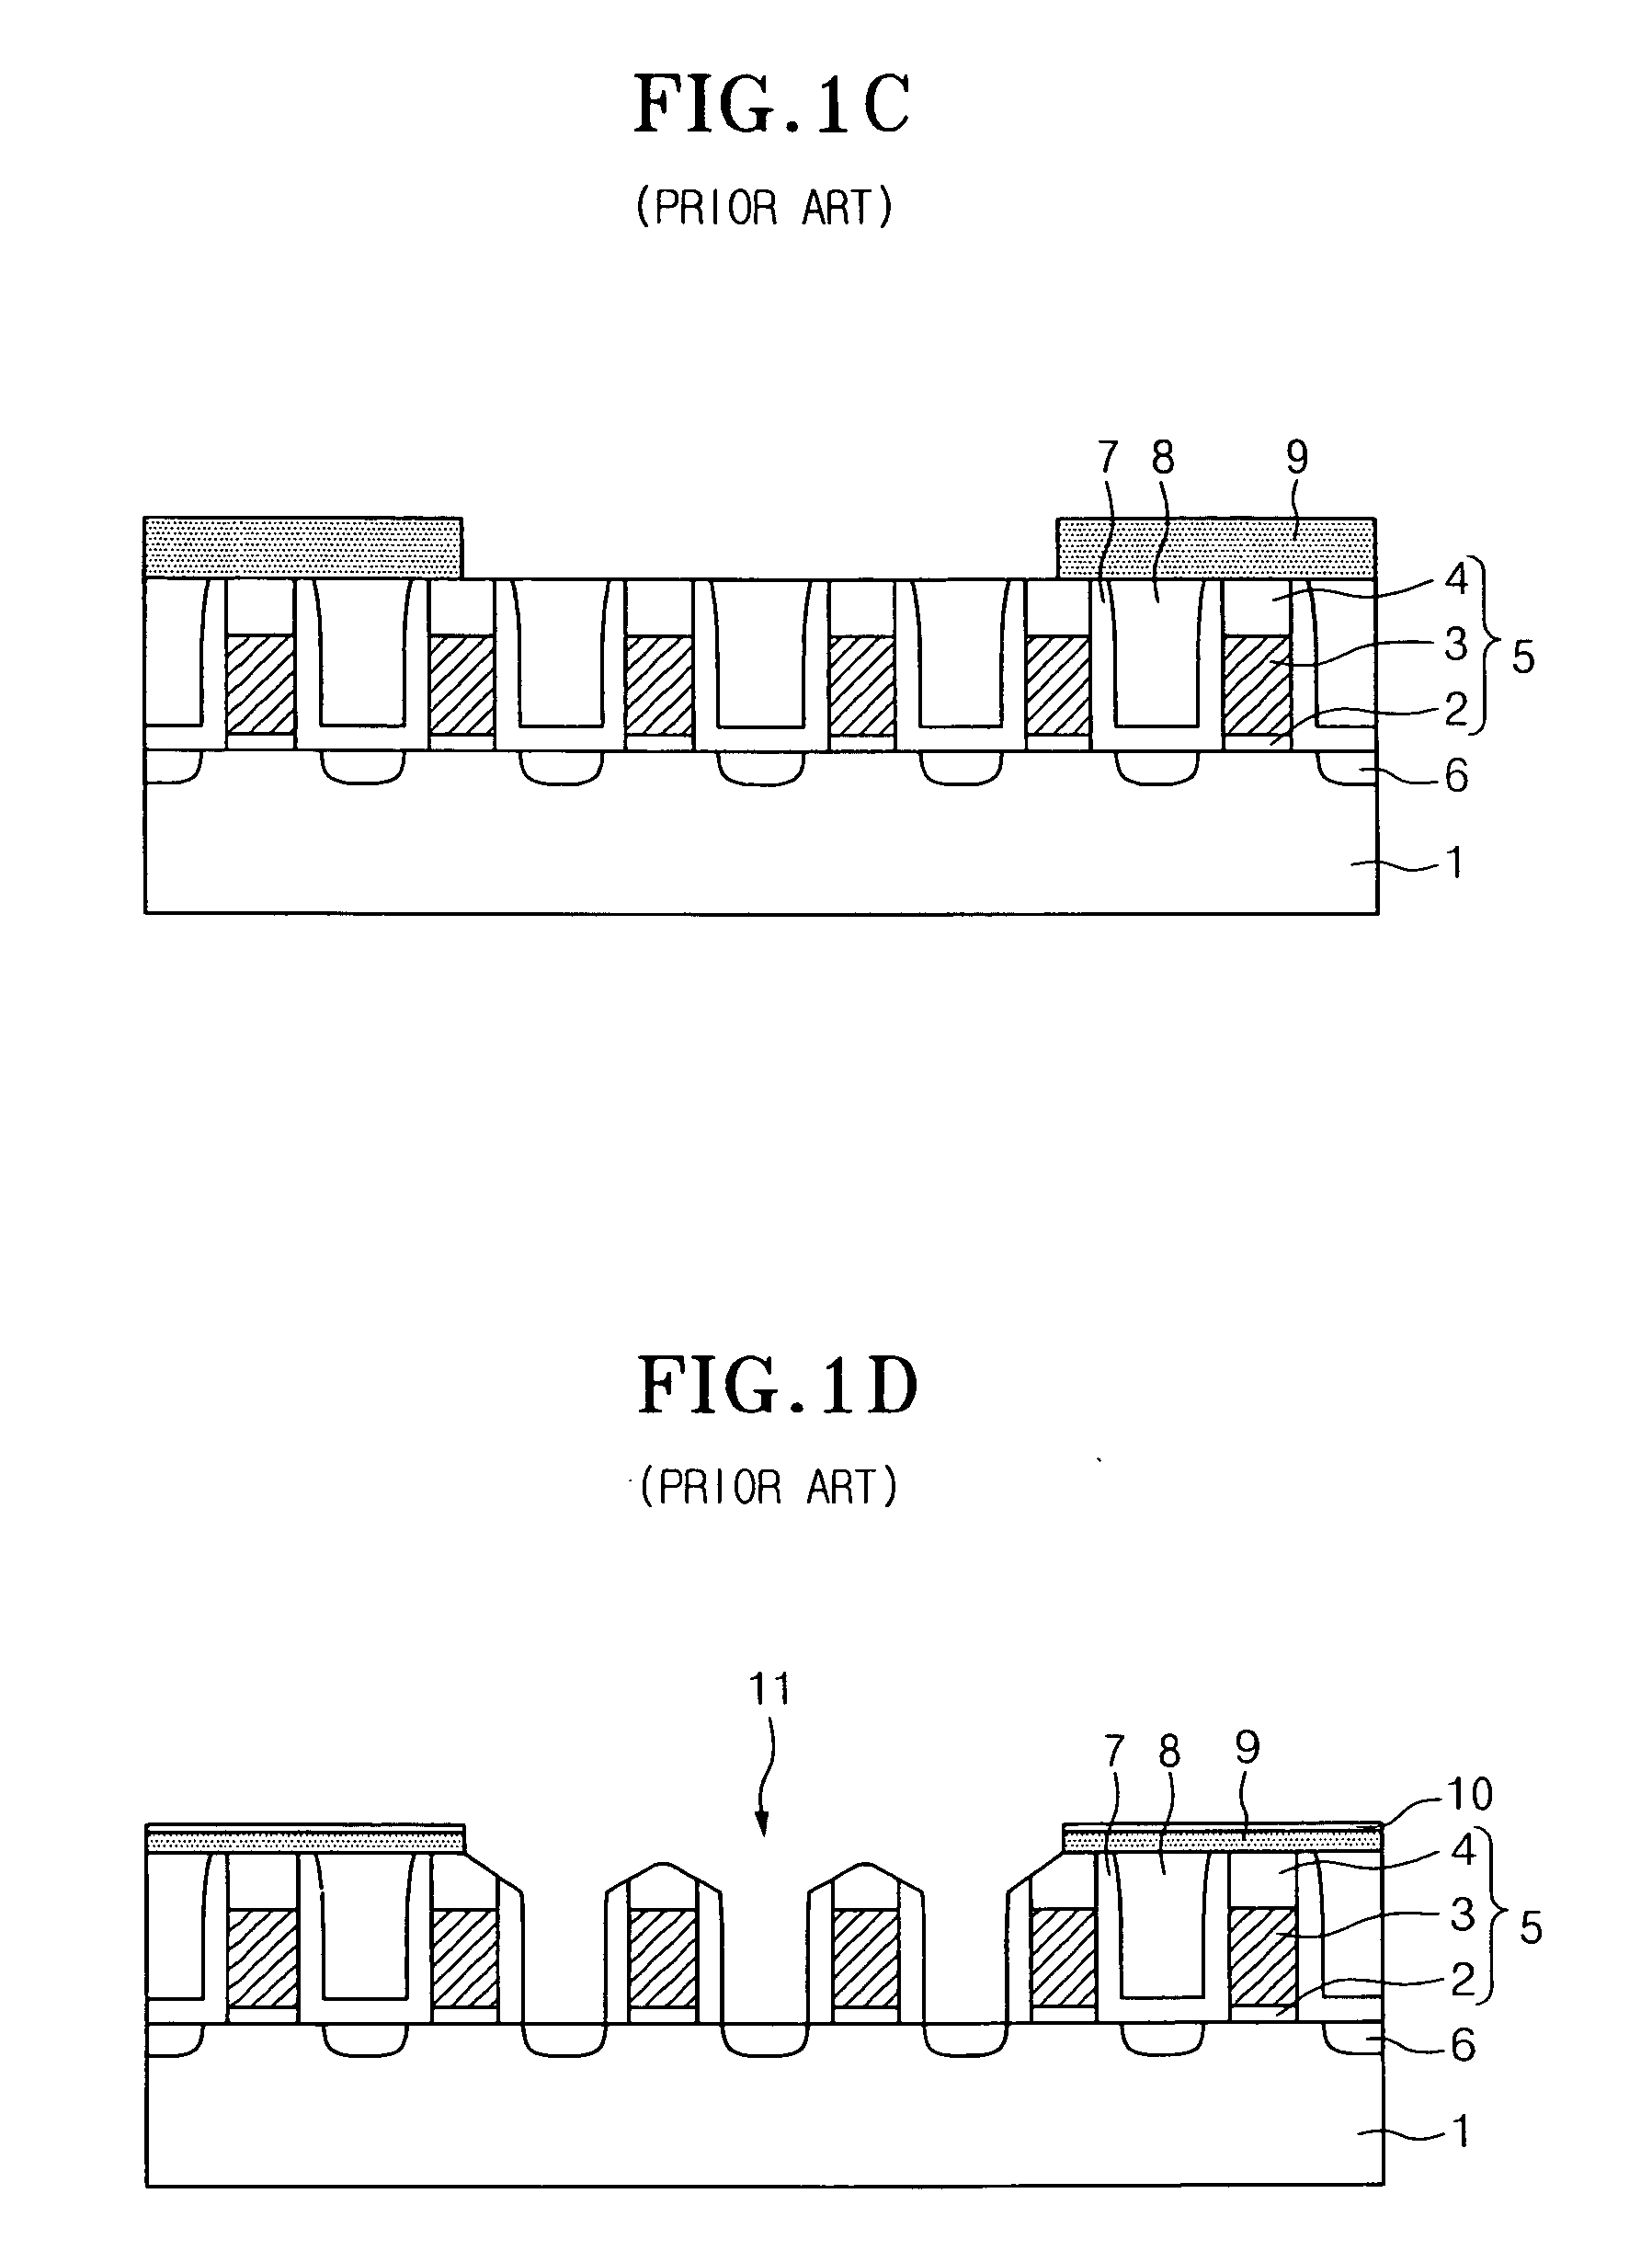 Method of forming an electrical contact in a semiconductor device using an improved self-aligned contact (SAC) process